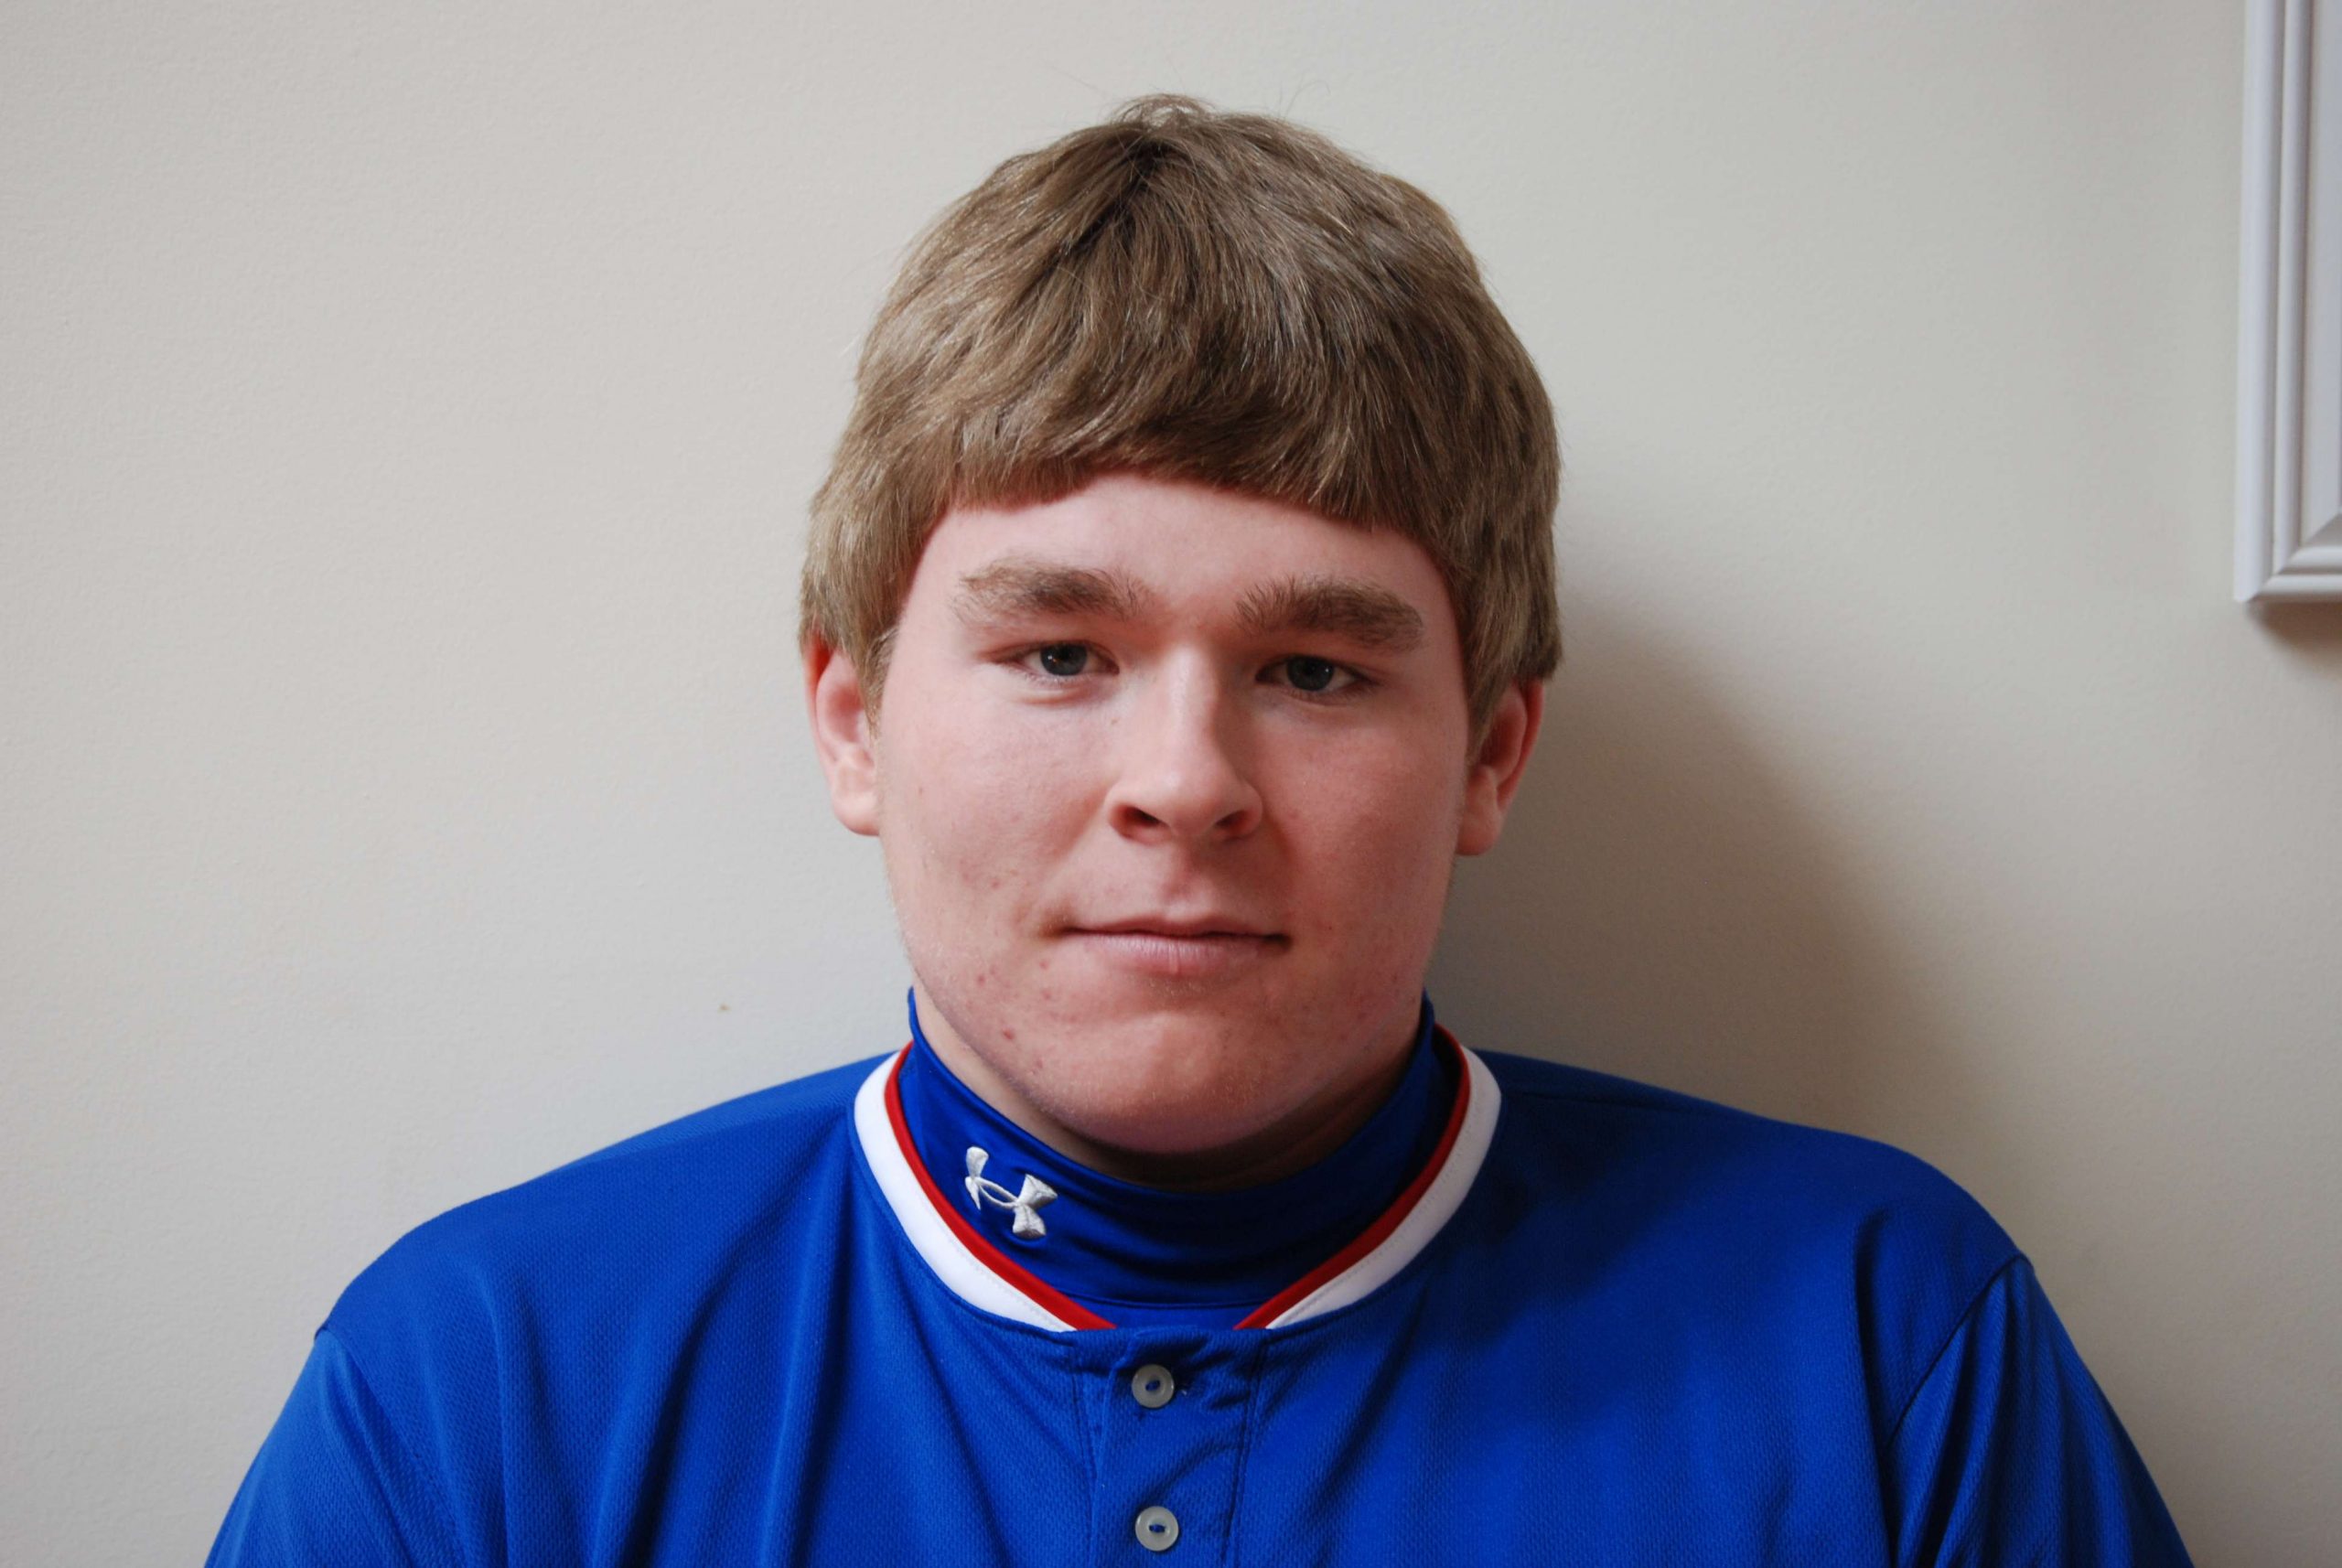 <p>Virginia: Dylan Berry</p>
<p>
Berry is a senior at Madison County High School. He won a qualifier event in 2014 B.A.S.S. Nation Virginia High School Tournament Series and finished in the Top 10 in several others. Berry was a charter member of the Madison County High School Mountaineer Anglers.